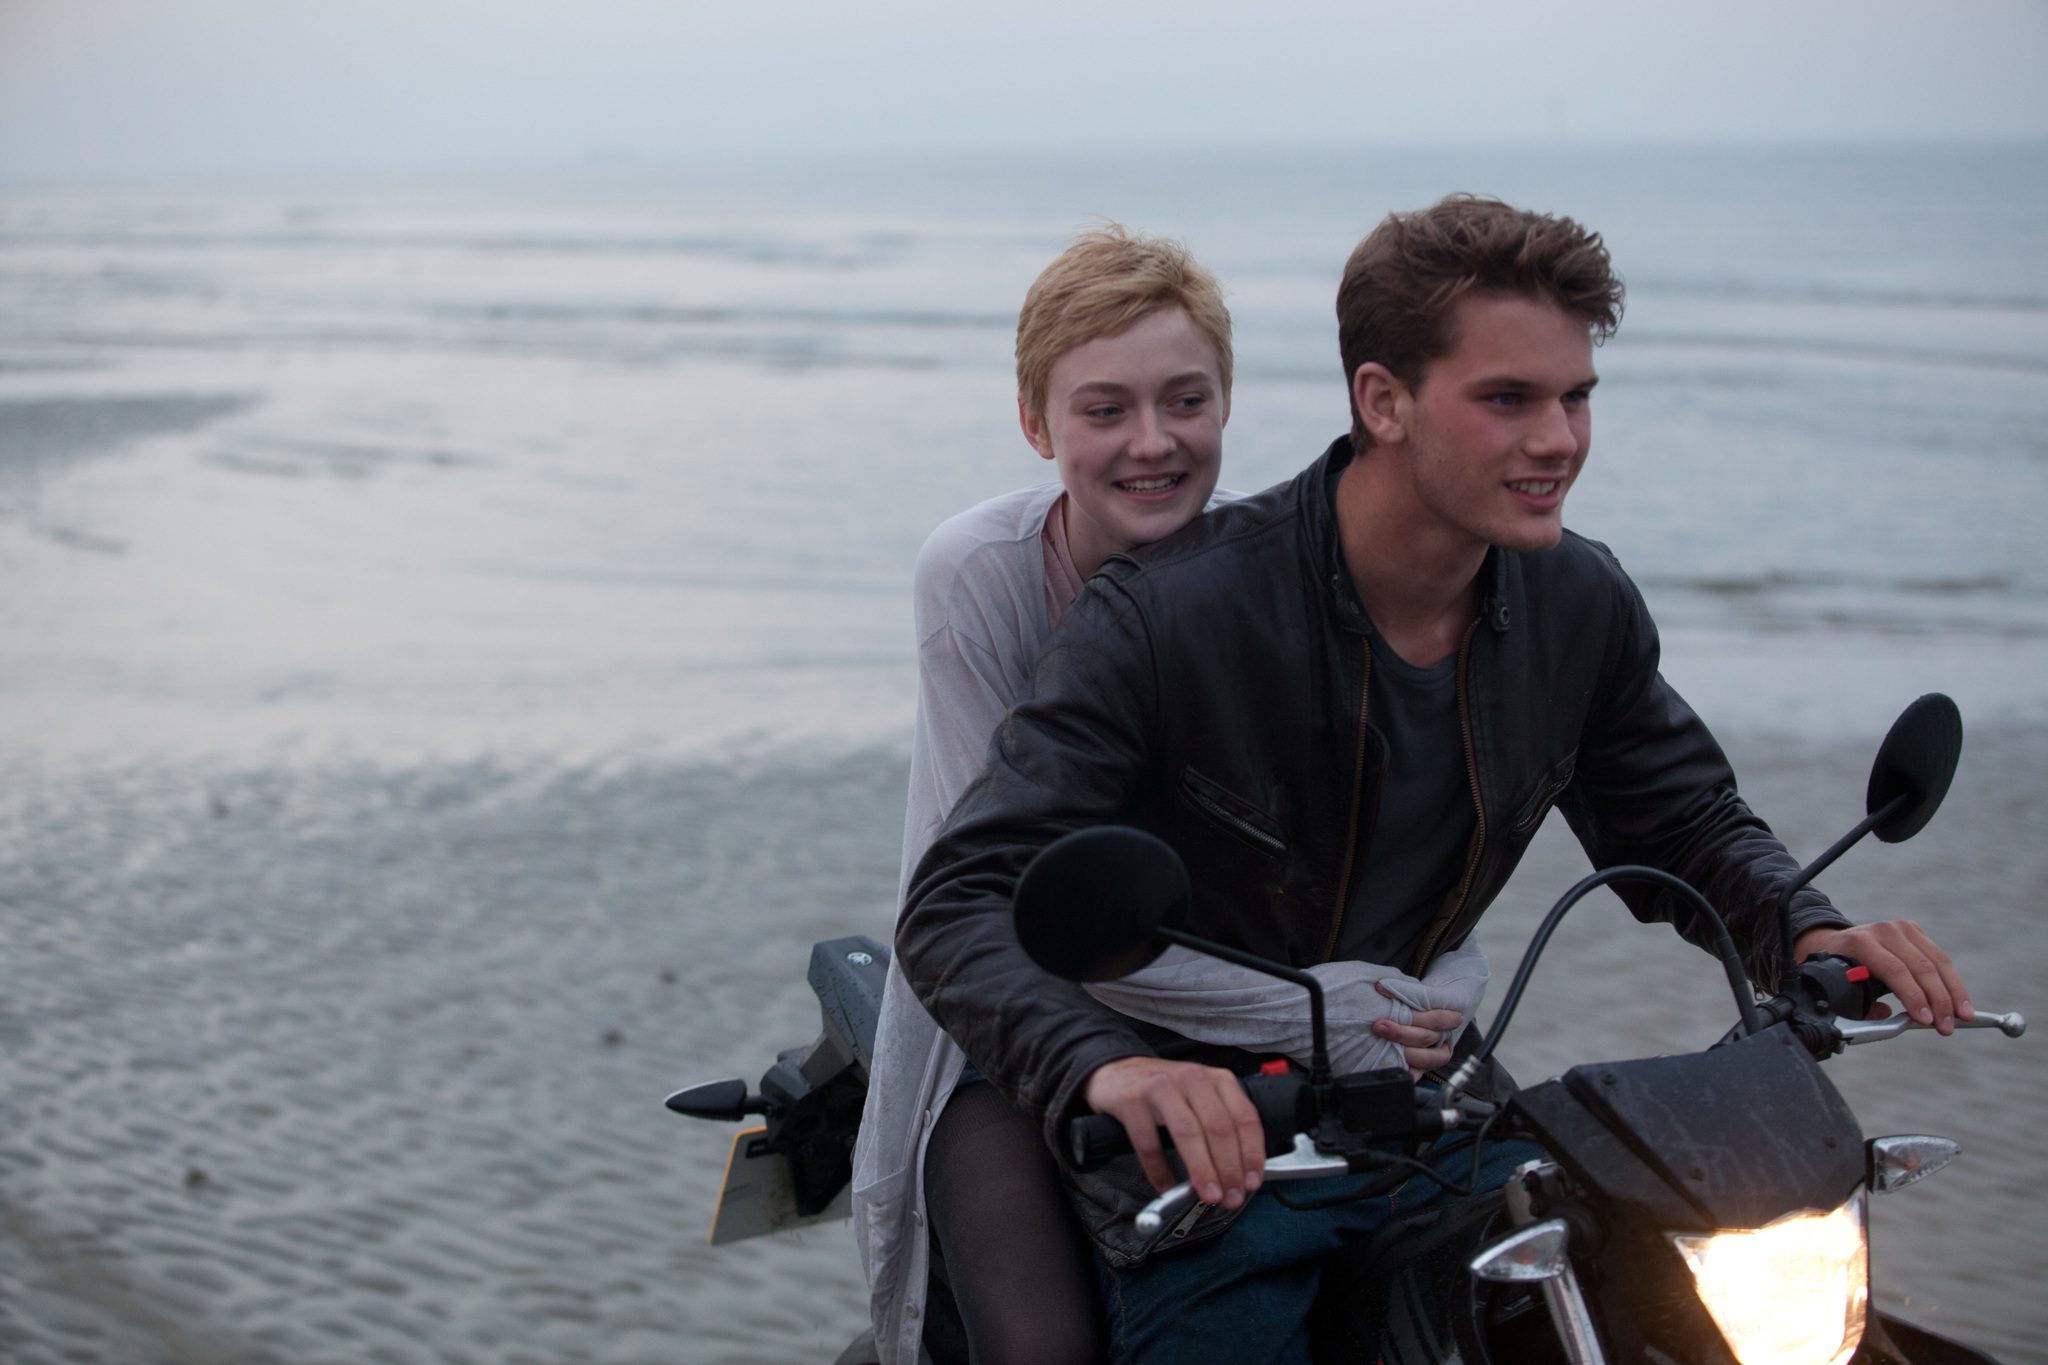 Now Is Good (2012)